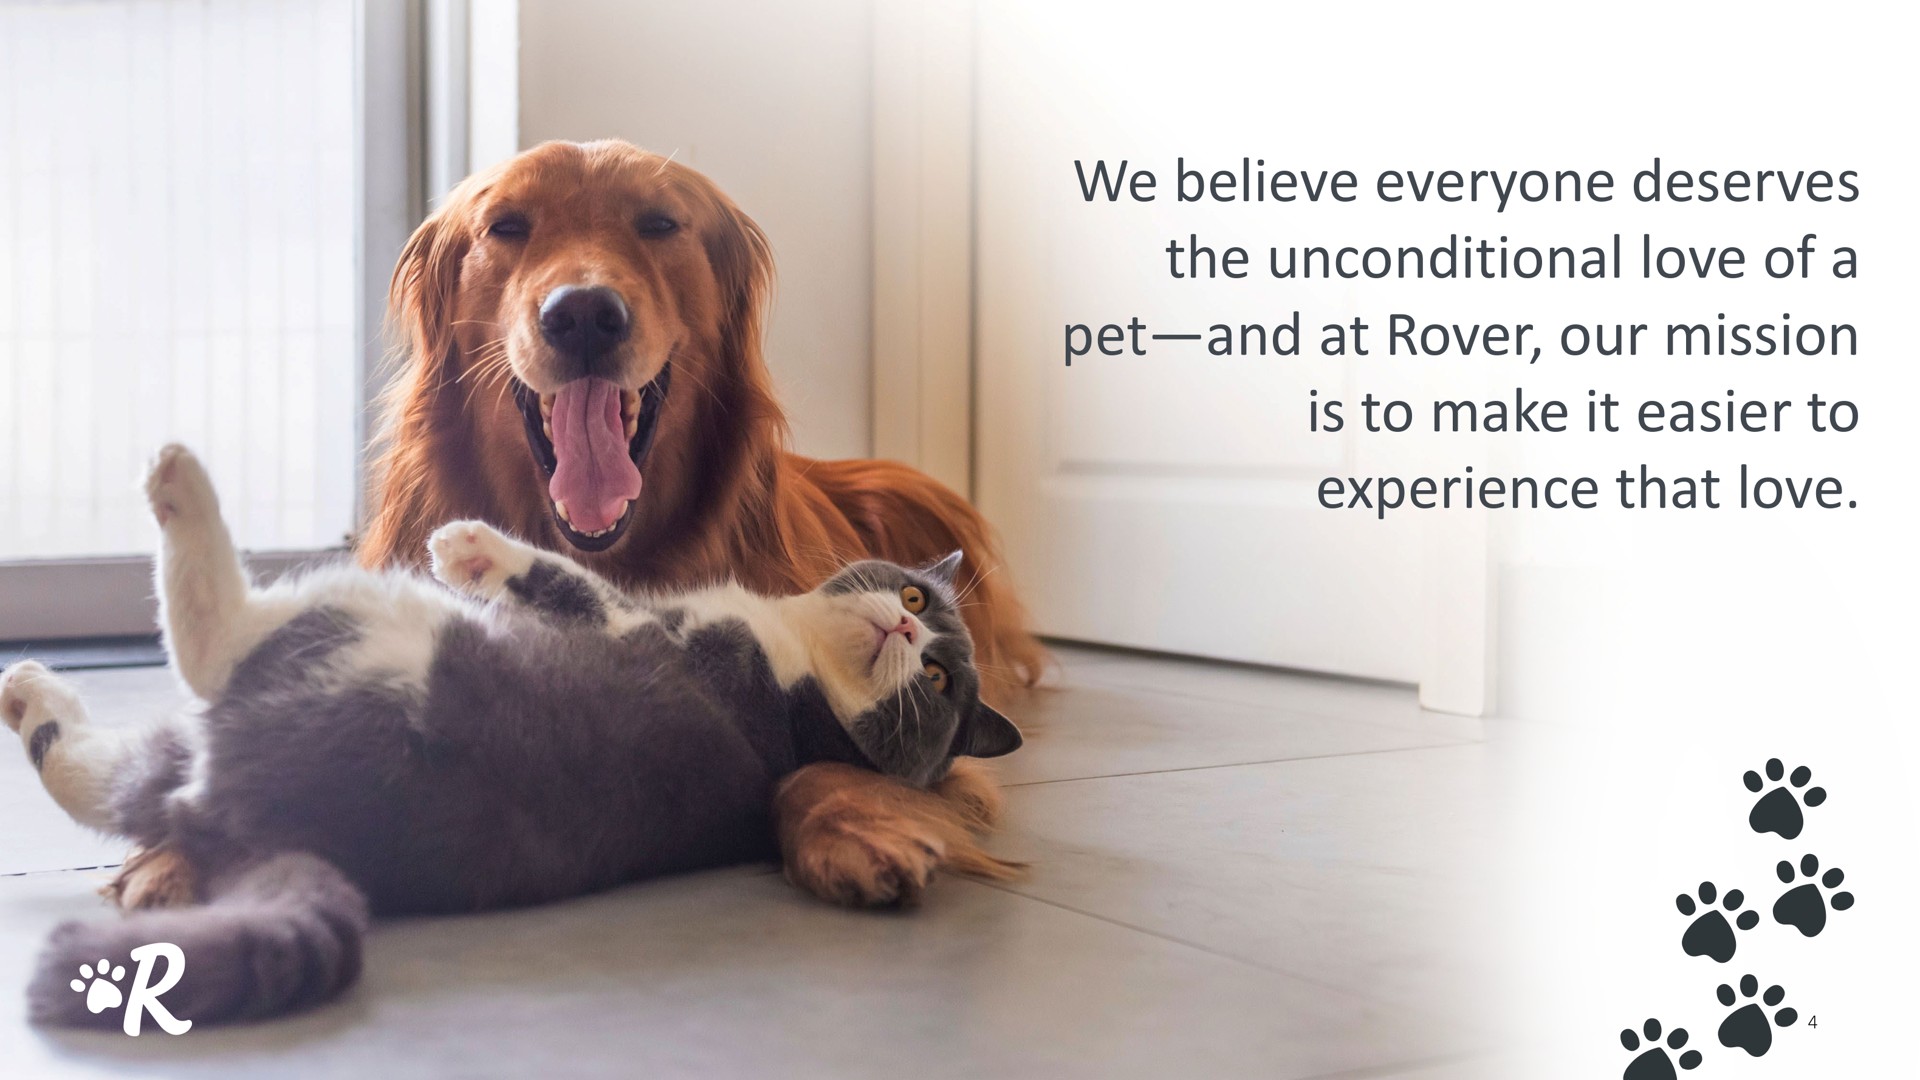 we believe everyone deserves the unconditional love of a pet and at rover our mission is to make it easier to experience that love | Rover